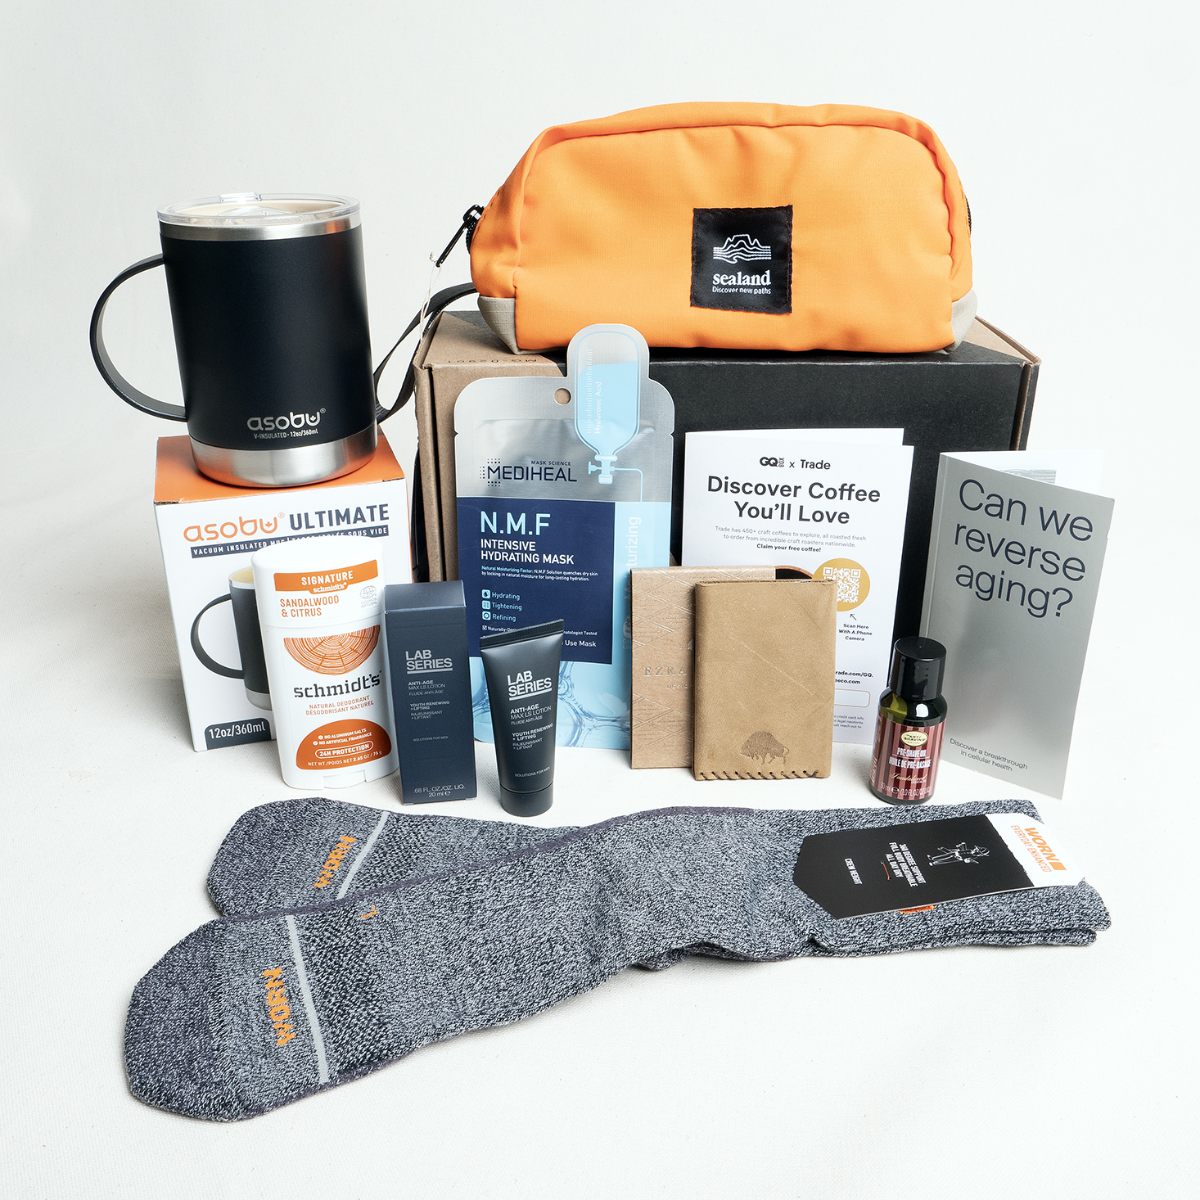 35. Surprise Him Every Month with a Customized Subscription Box Tailored to His Interests